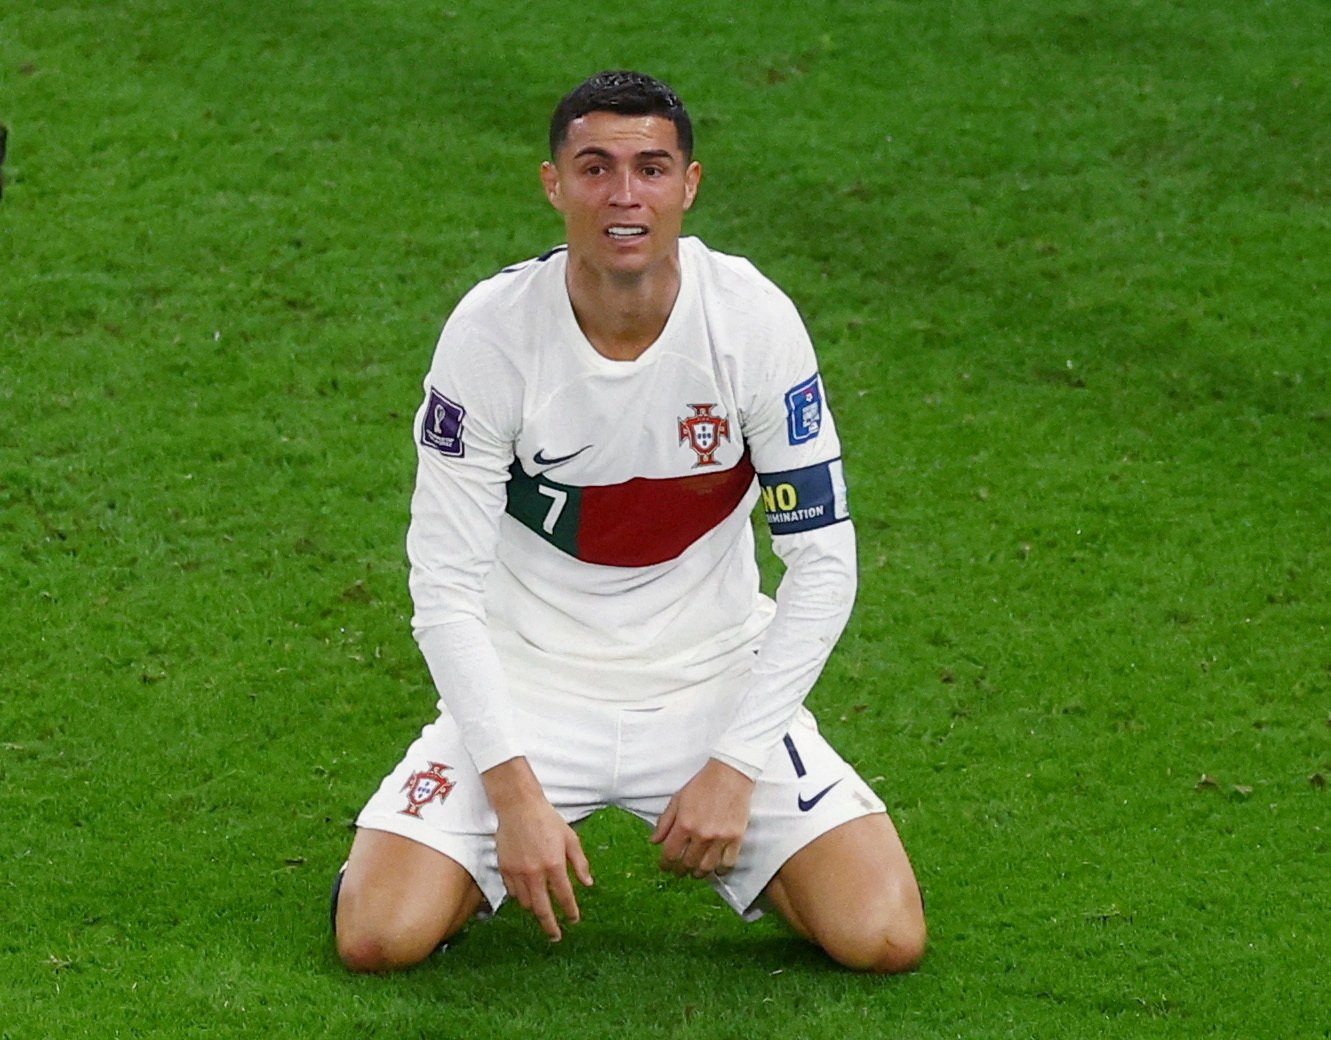 Cristiano Ronaldo's old comment 'finishing with dignity at a good club'  goes viral after his Al Nassr move - WATCH | Football News, Times Now